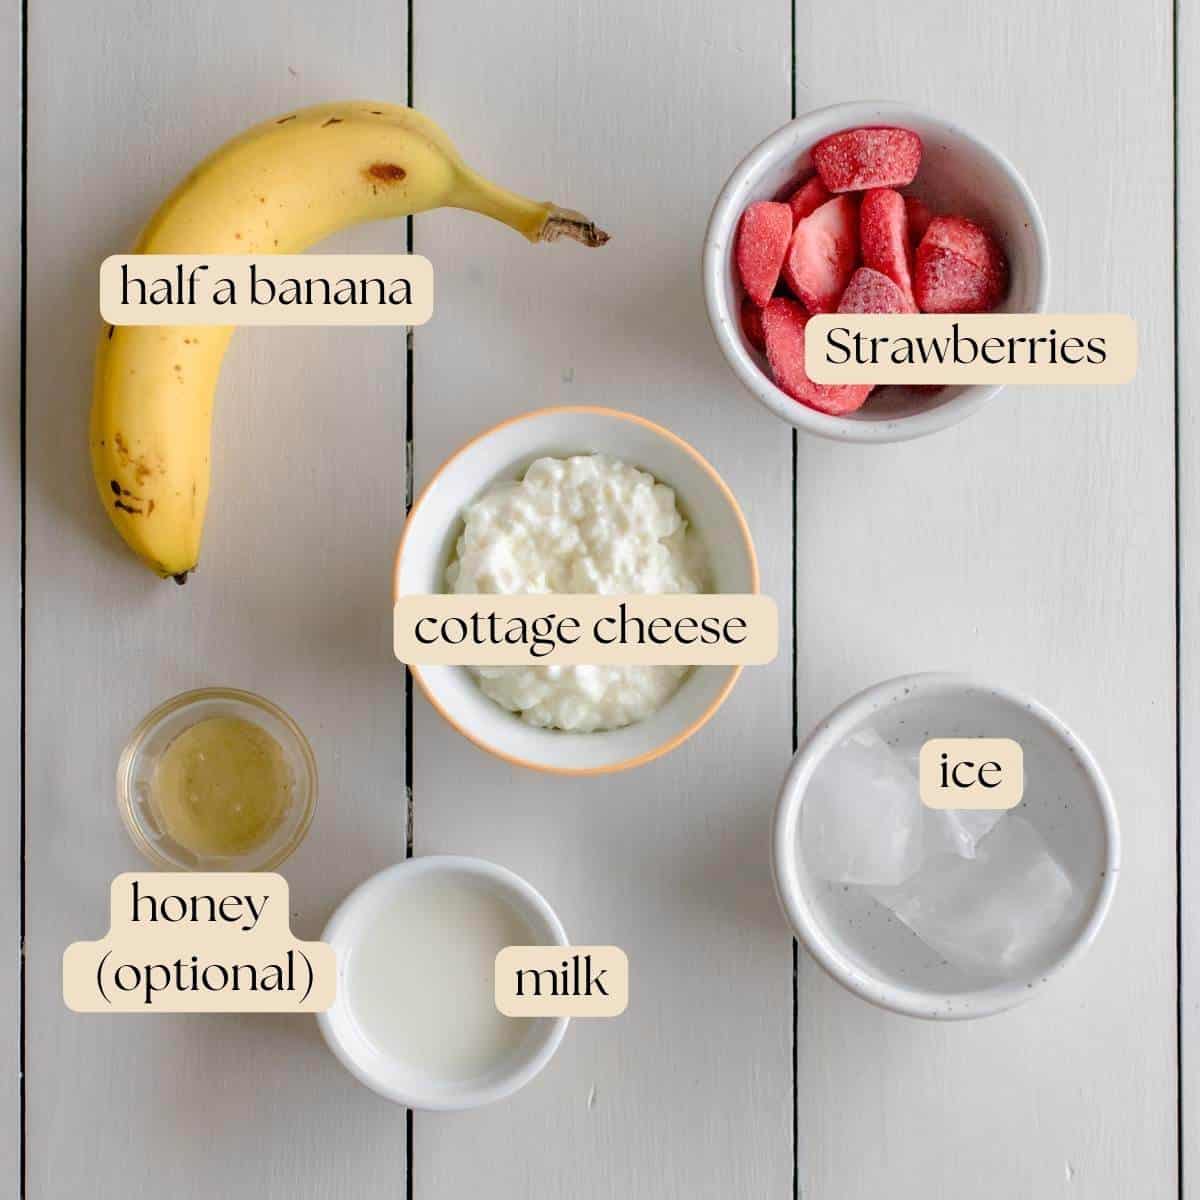 Ingredients you will need: half a banana, strawberries, cottage cheese, ice, milk and honey if so desired.